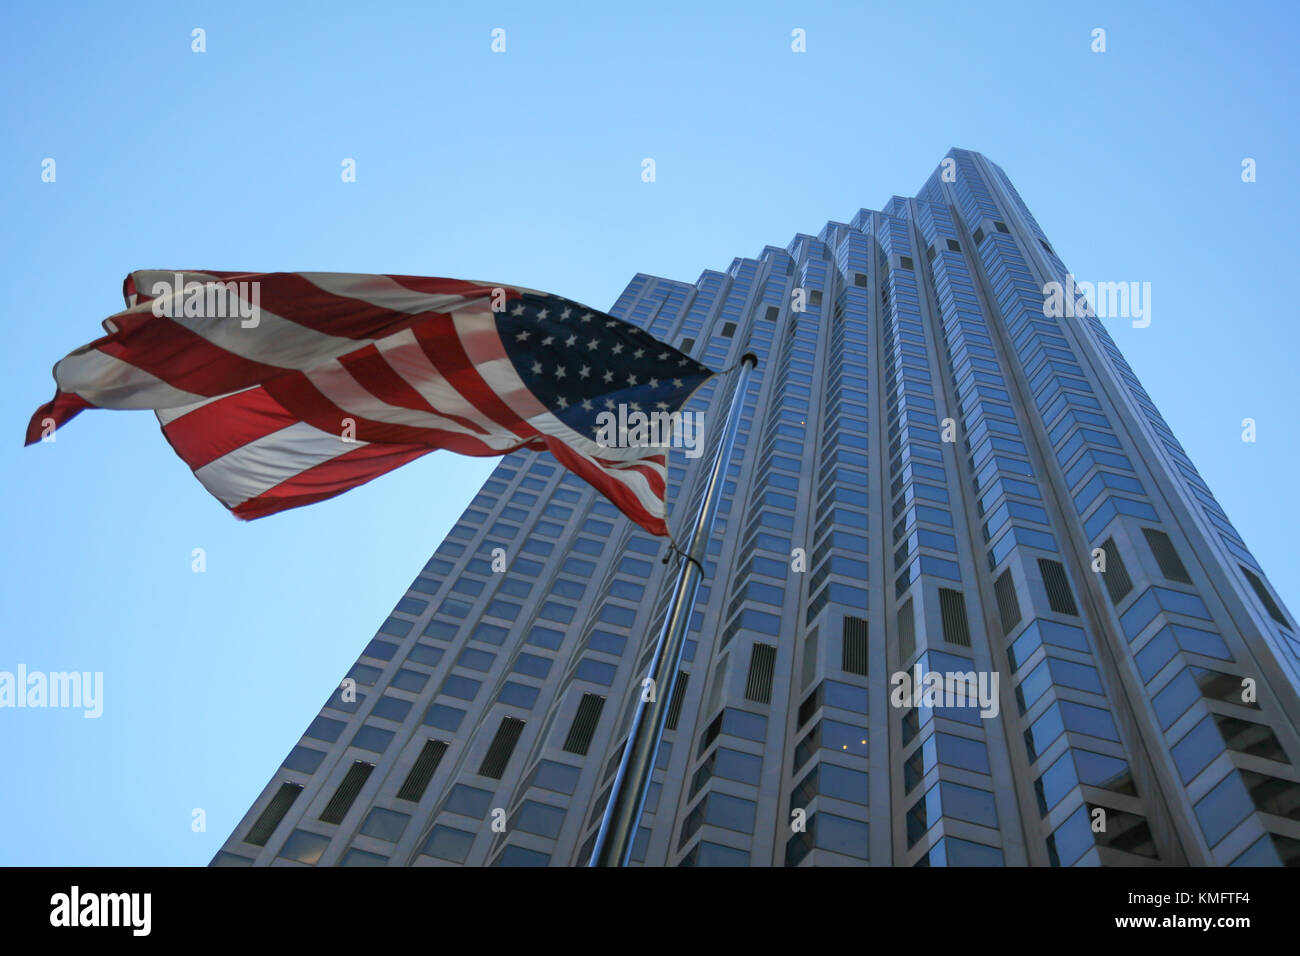 SAN FRANCISCO, CA - AUGUST 2, 2008: American Flag over Skyscraper in San Francisco downtown and sky background Stock Photo